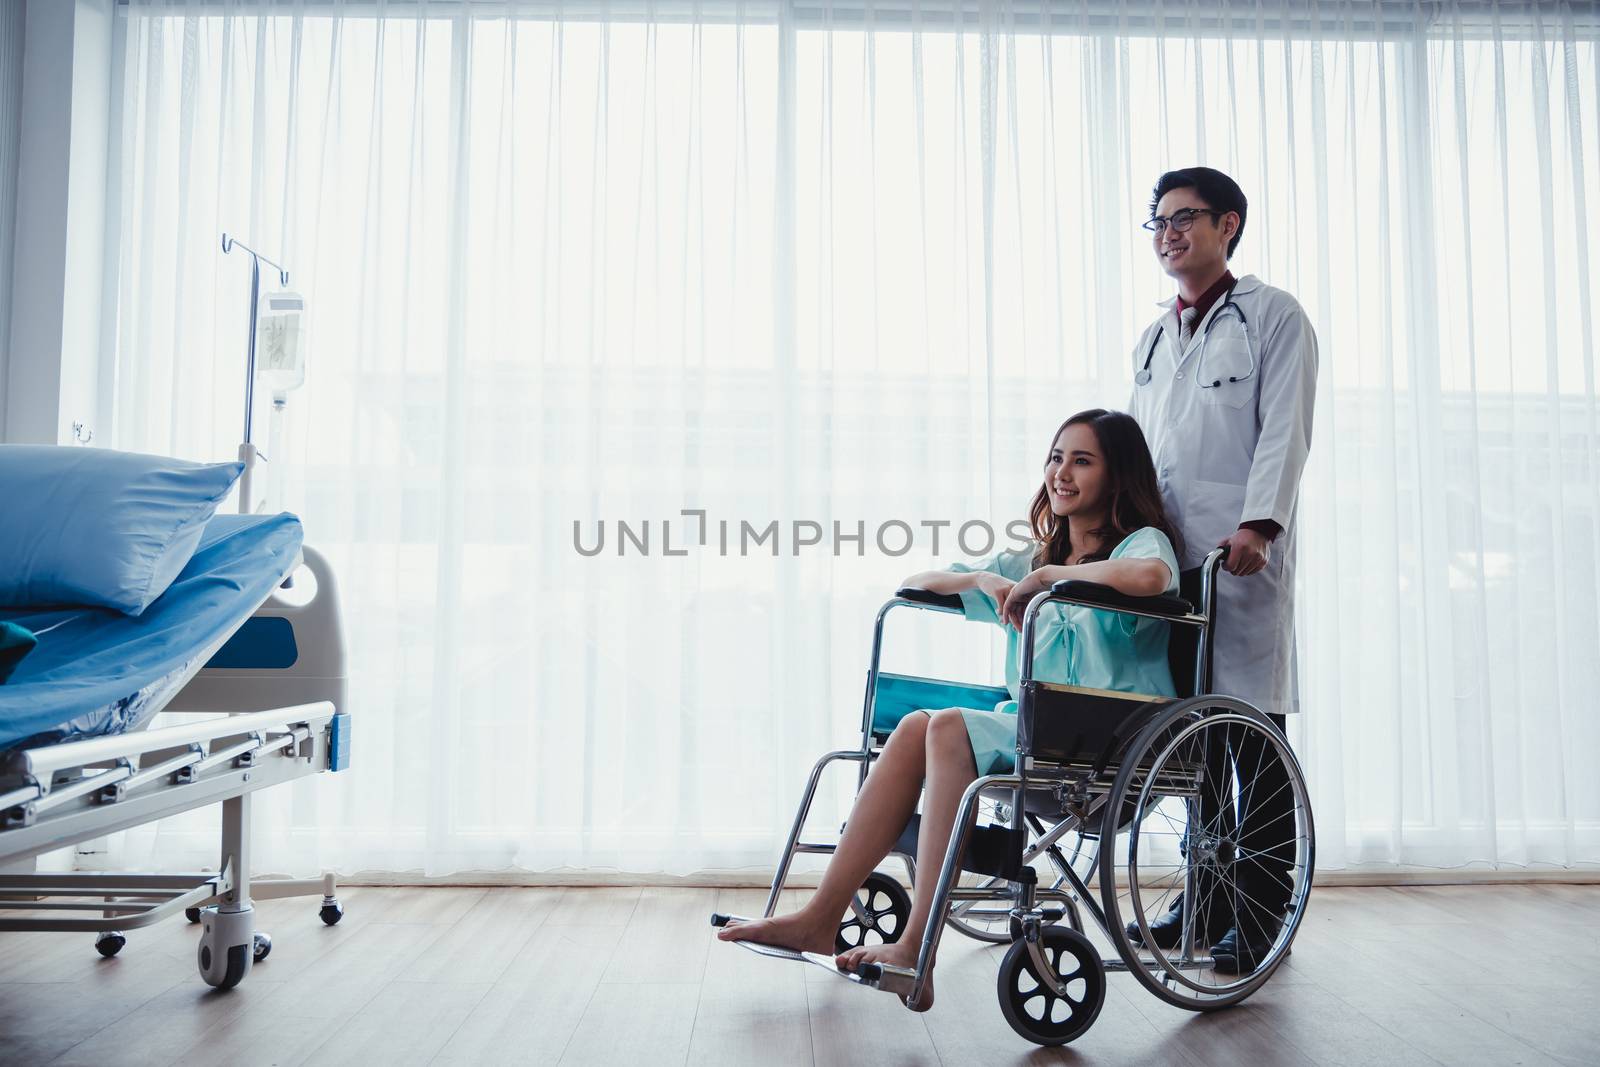 Doctor and the female patient are smiling because her symptoms are improving in the hospital.